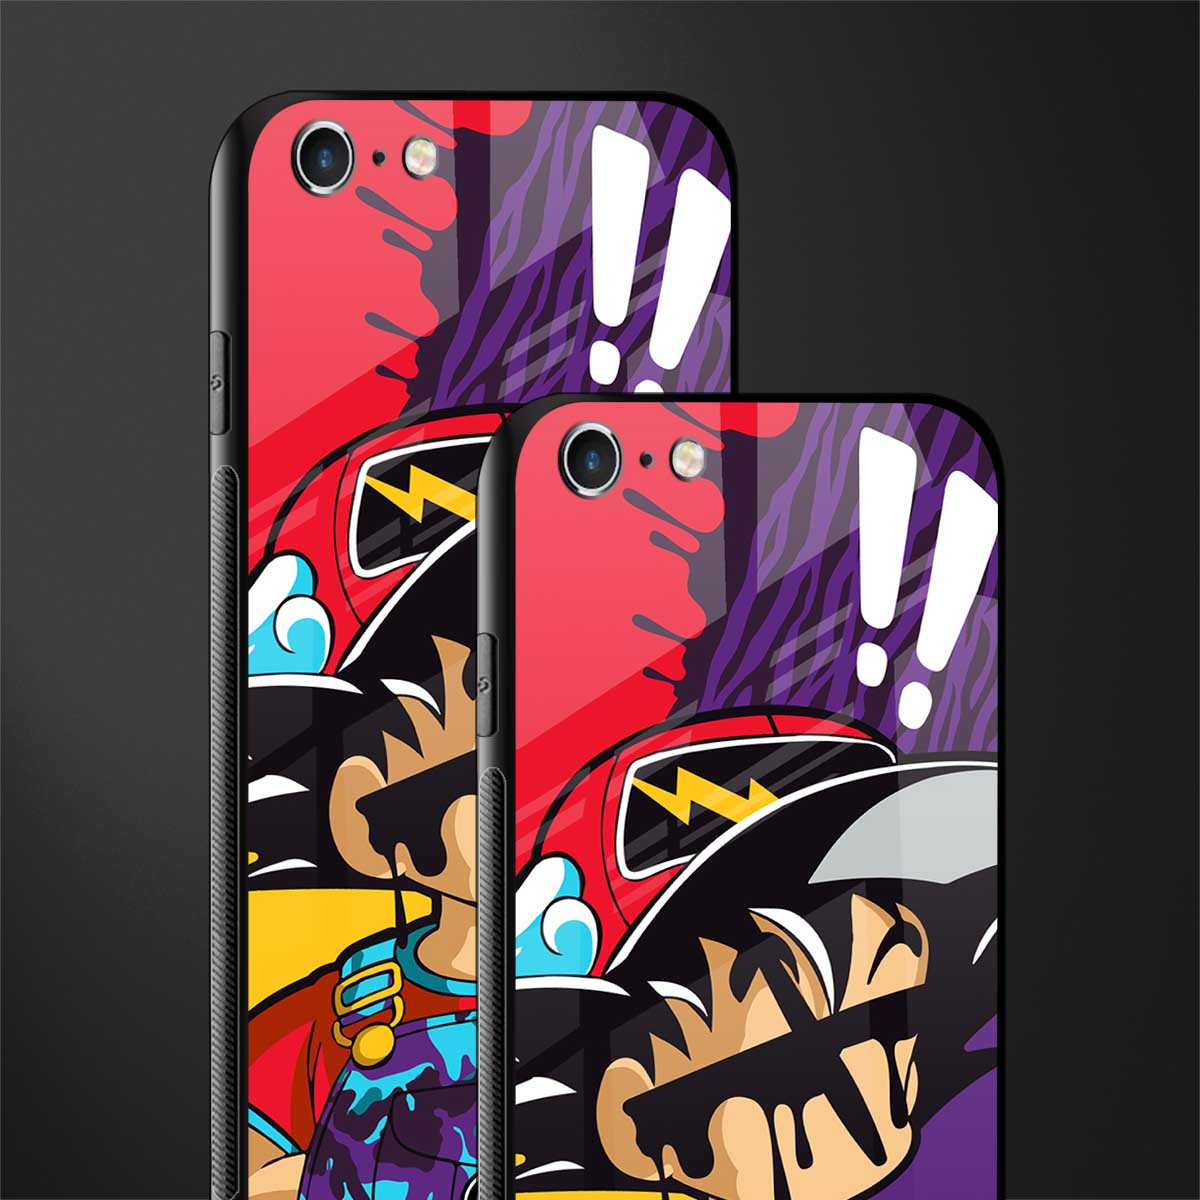 dragon ball z art phone cover for iphone 6